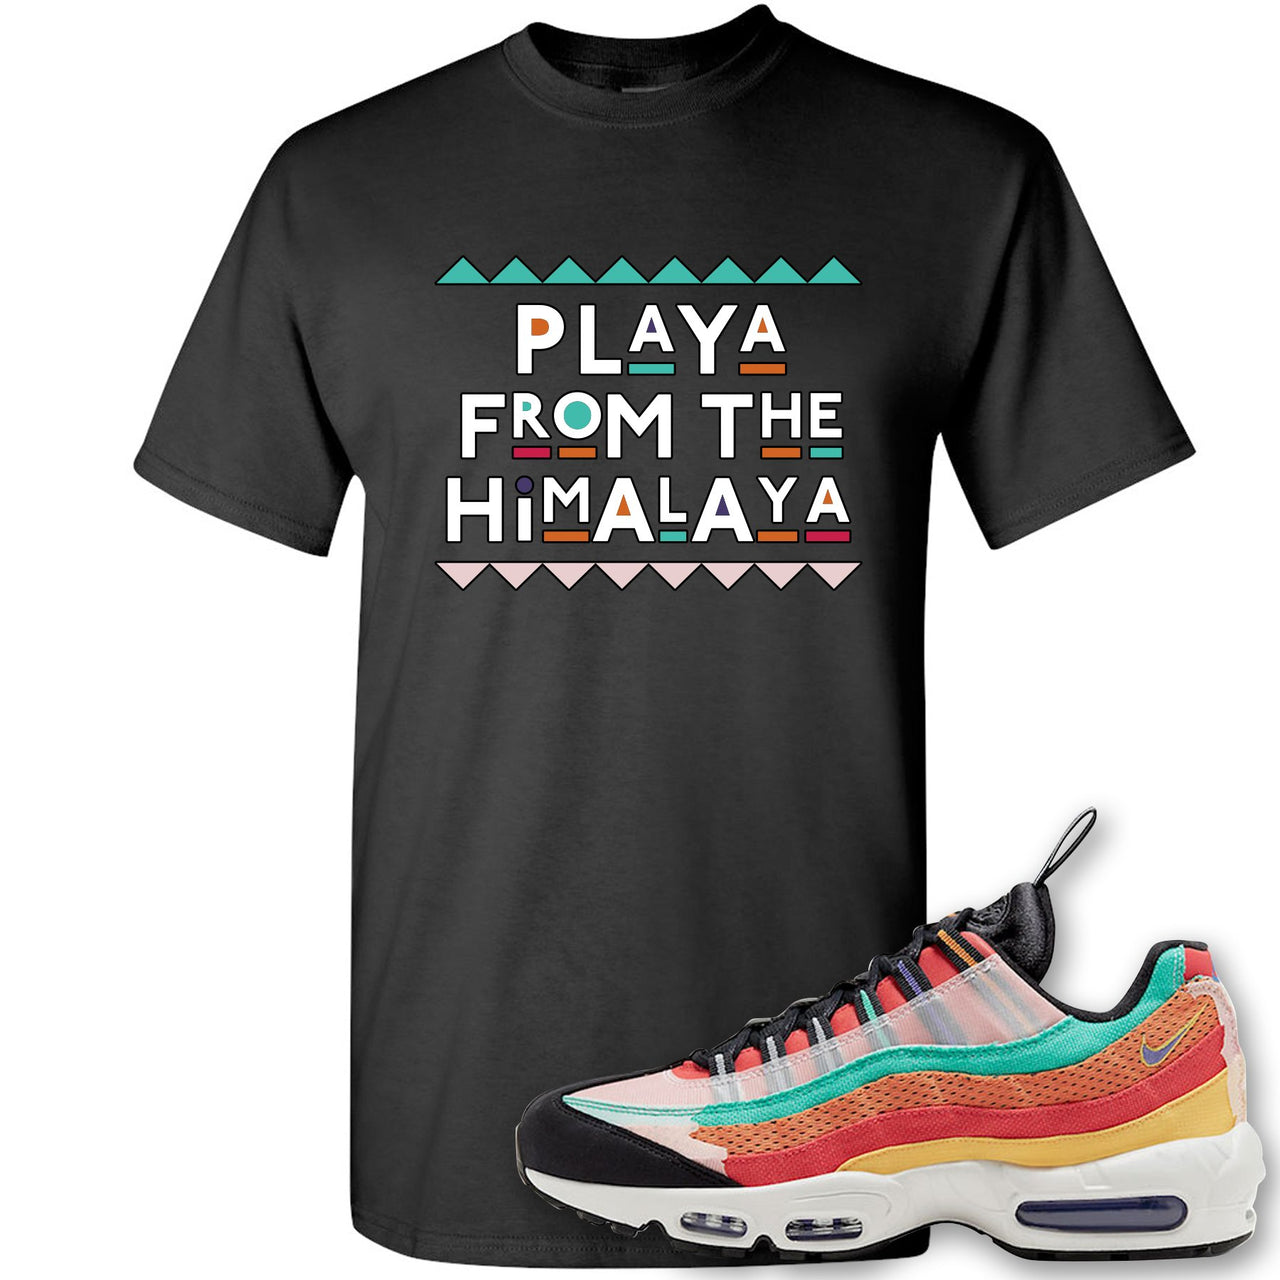 Air Max 95 Black History Month Sneaker Black T Shirt | Tees to match Nike Air Max 95 Black History Month Shoes | Playa From The Himalaya